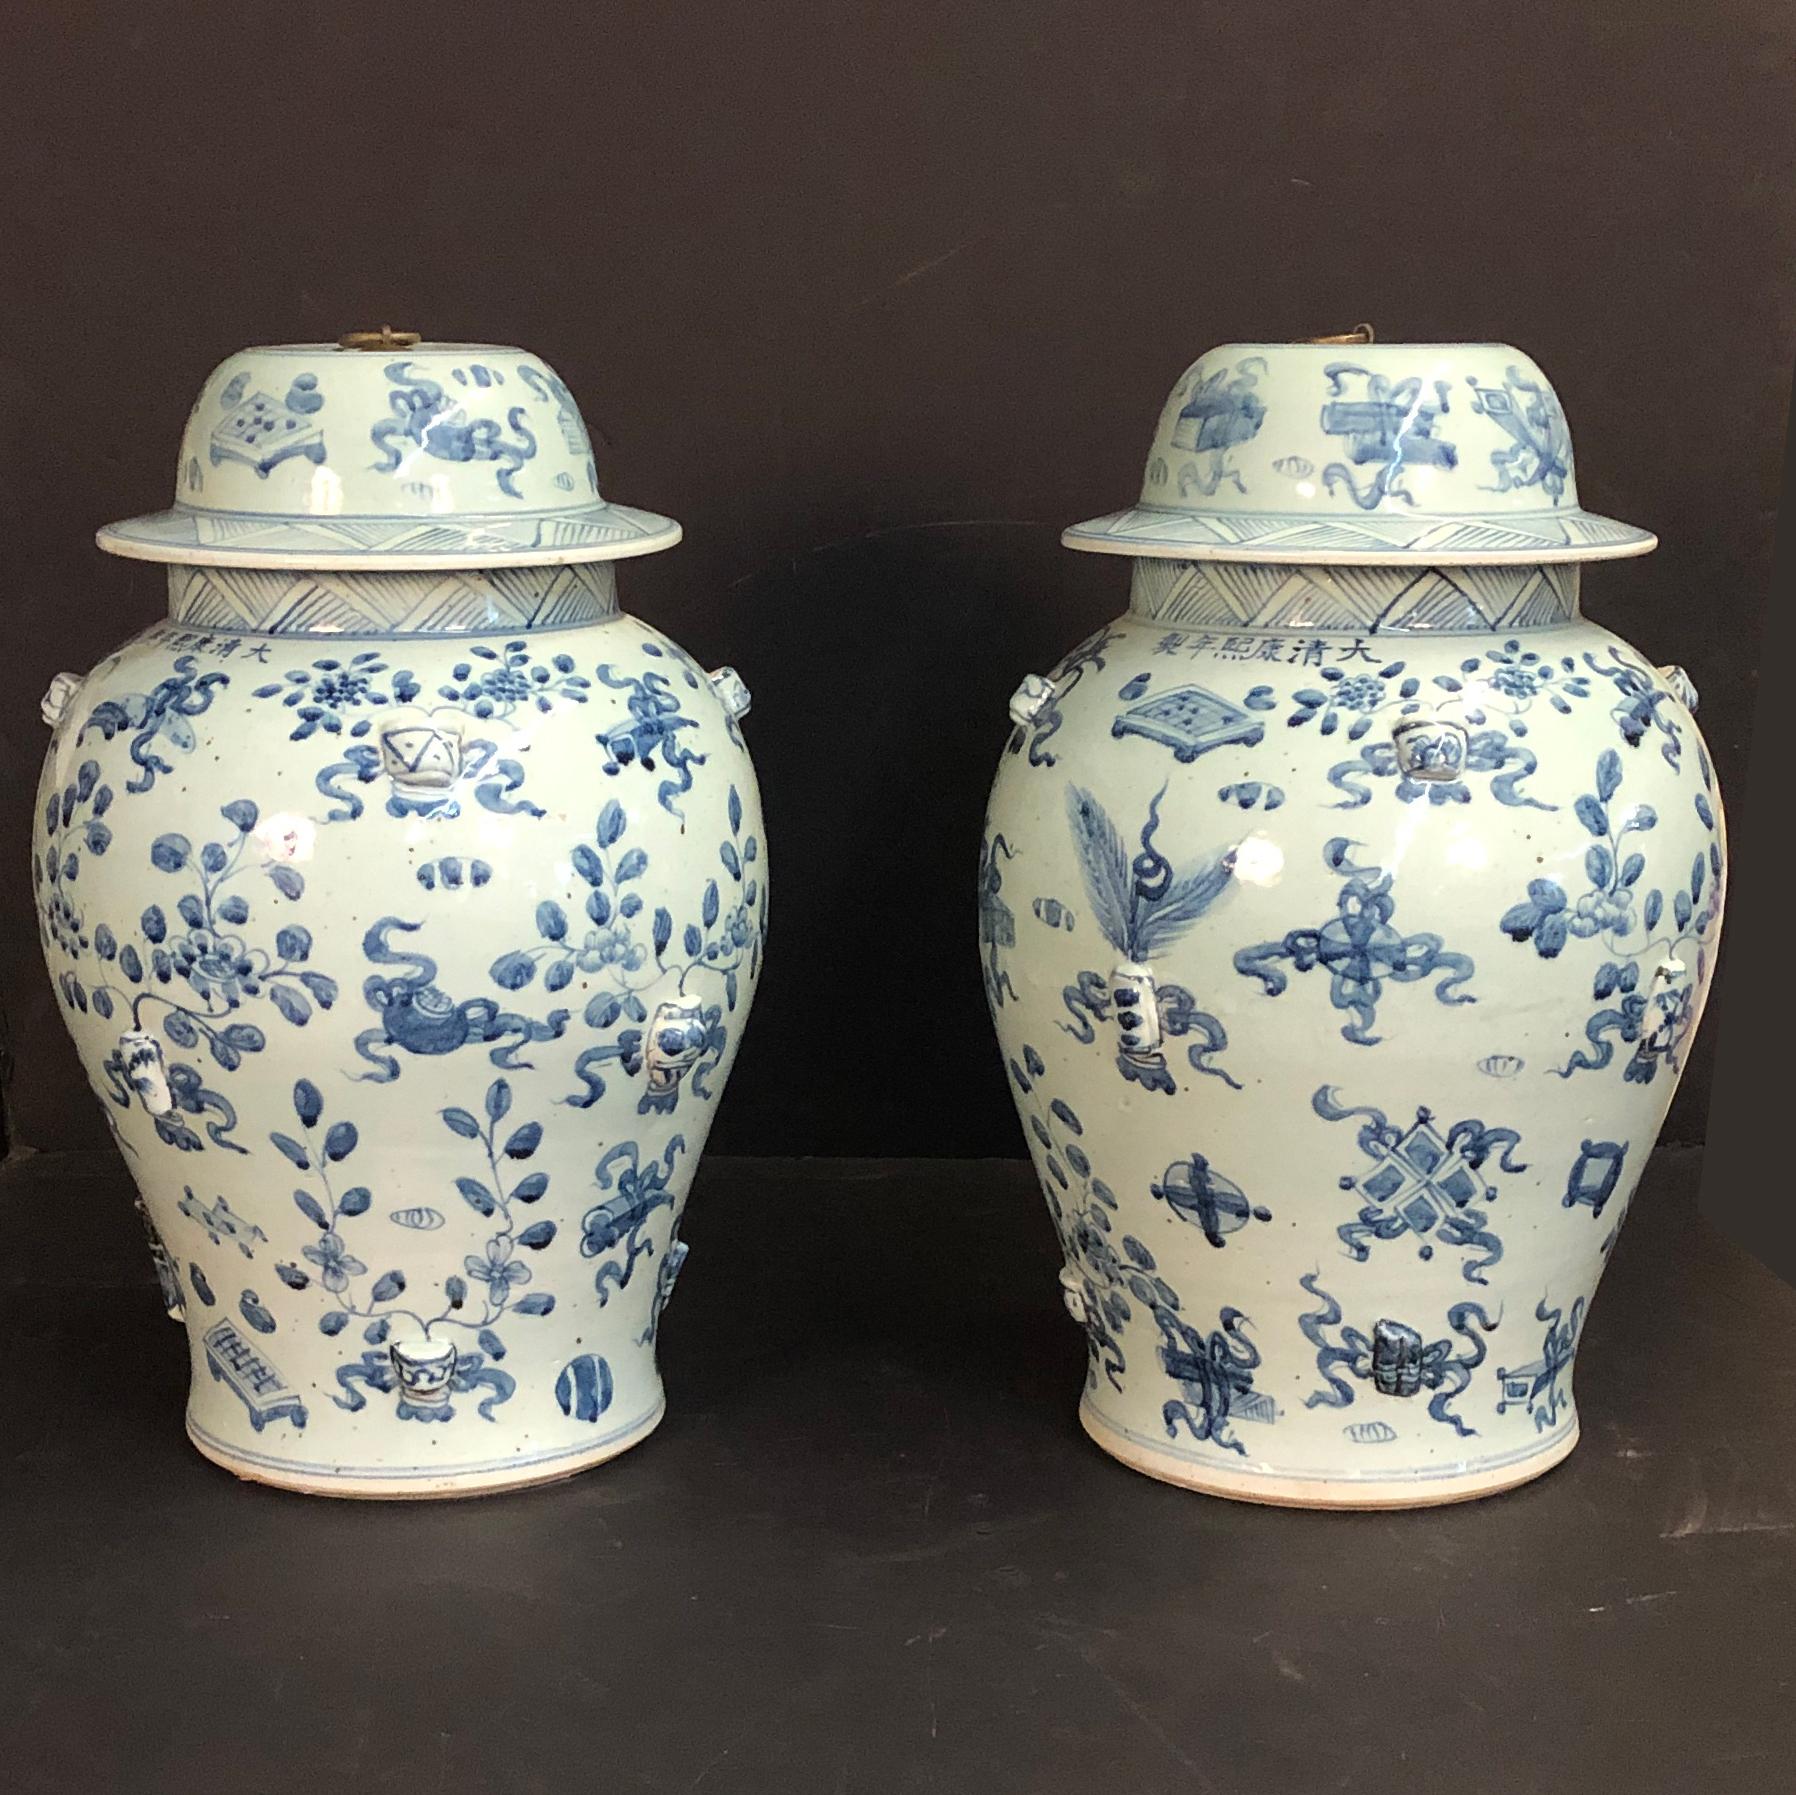 A large pair of blue and white hand painted ceramic lidded temple jars with metal ring turn handle and decorated with floral motifs and still life scenes.